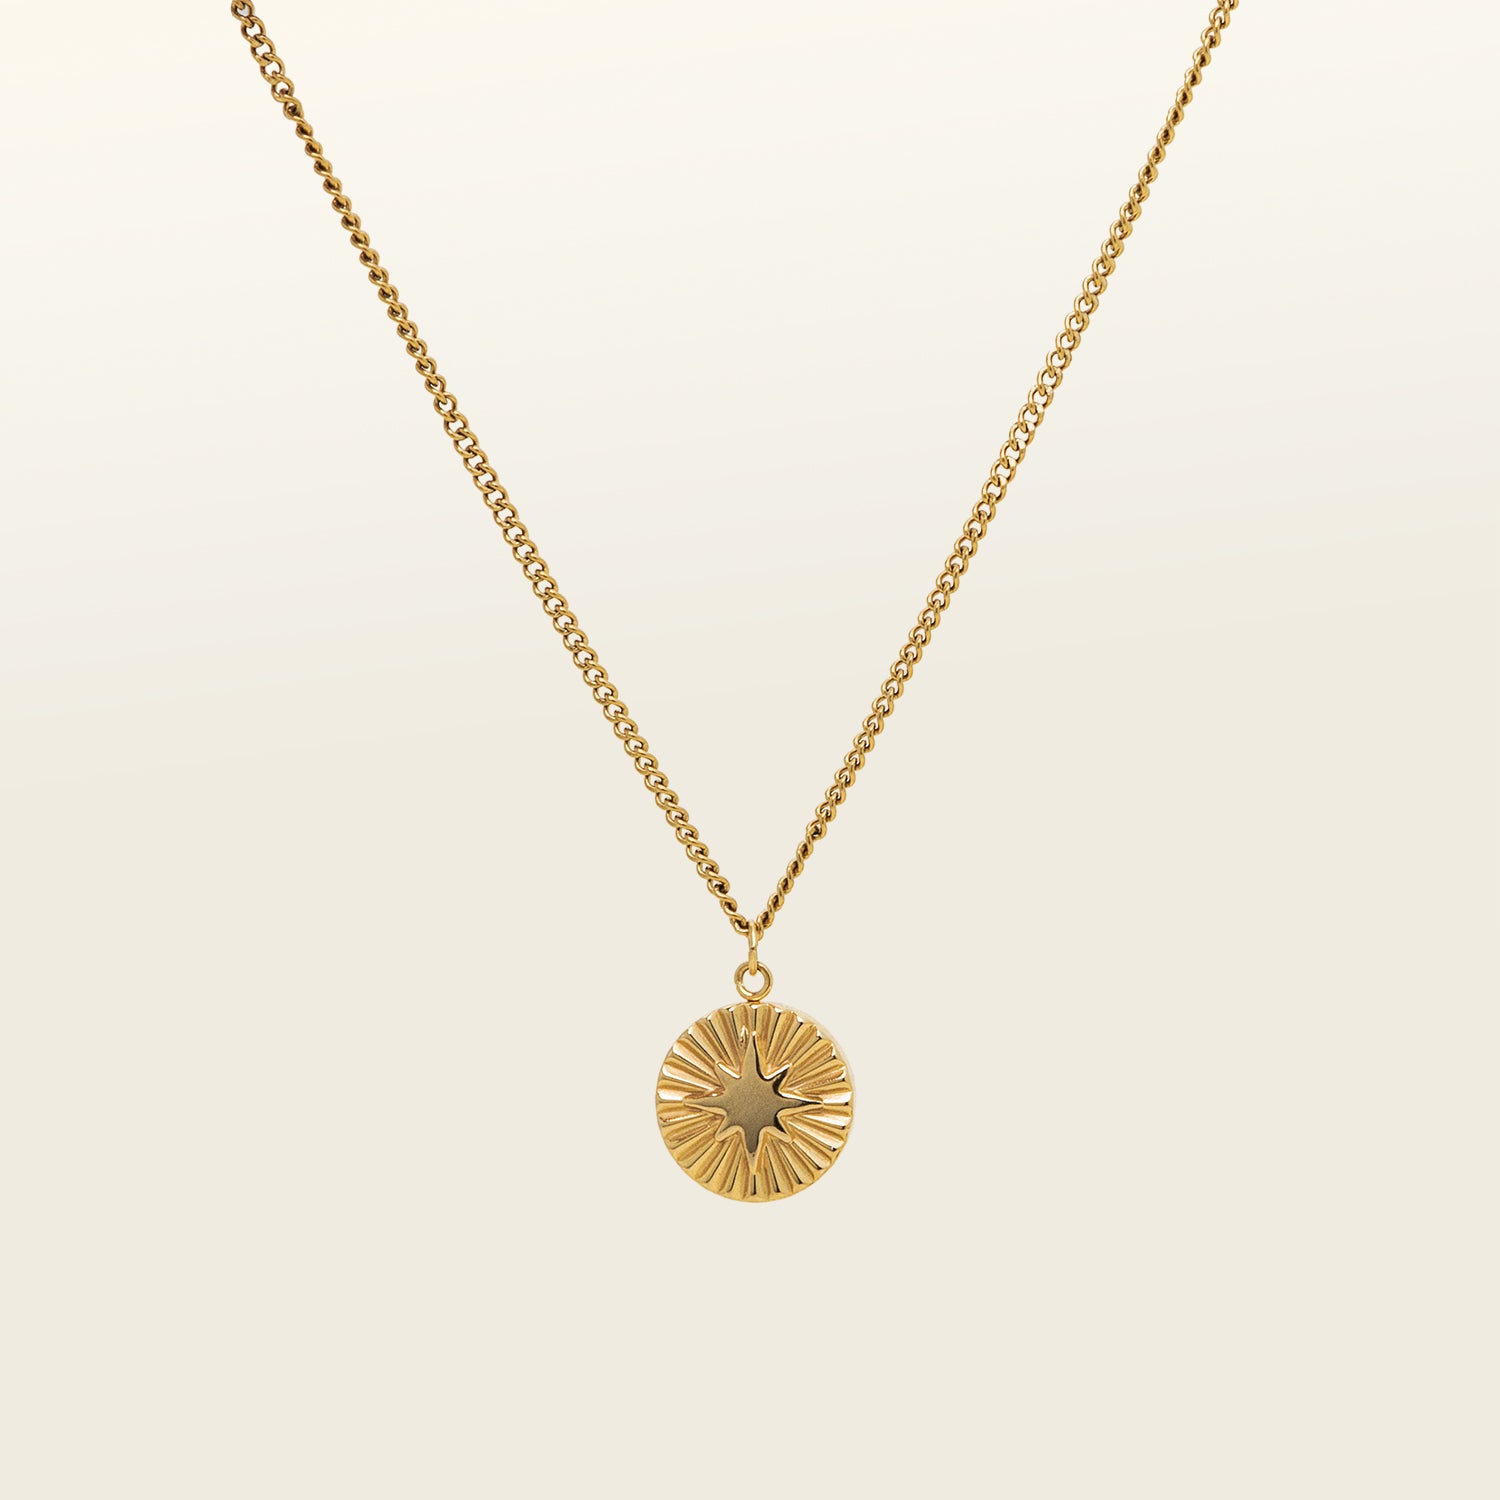 Image of the Starlight Pendant Necklace is adjustable, inspiring guidance and protection. This necklace is part of the Celestial Collection and pairs nicely with the Celestial Light Pendant Necklace. Constructed with 18K gold plating on 316L stainless steel, this piece is waterproof and resistant to tarnishing.